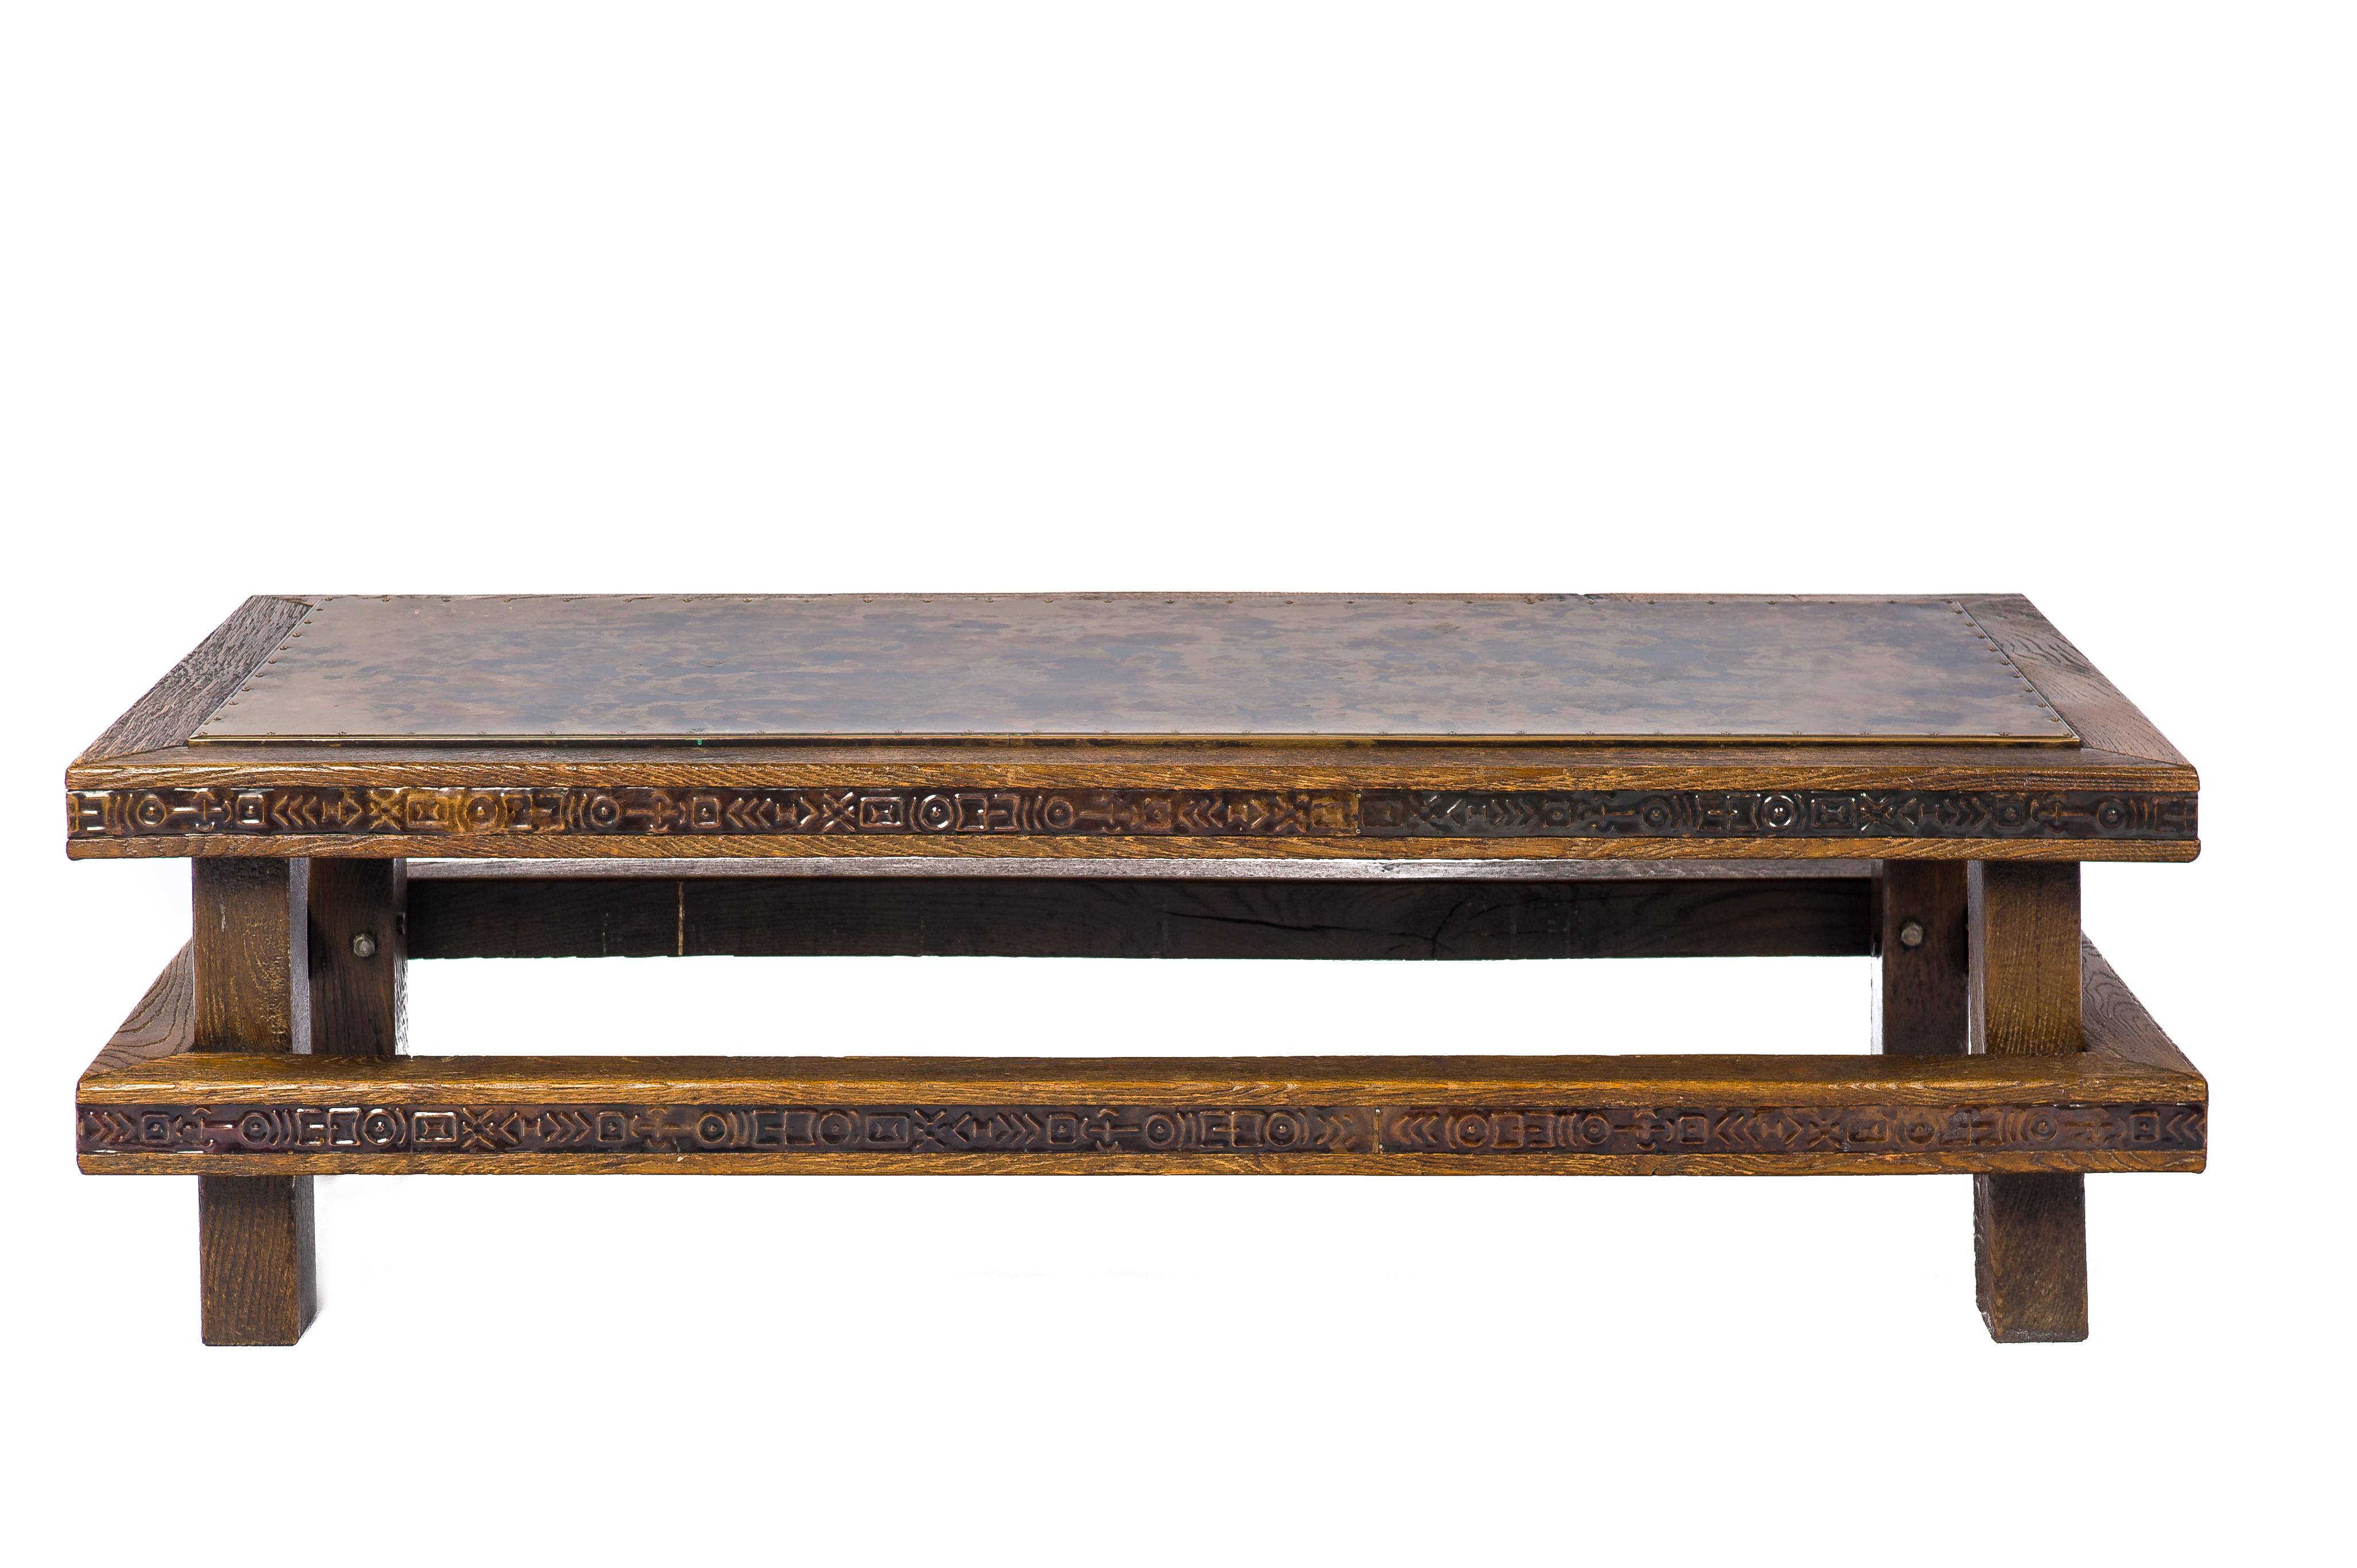 20th Century Midcentury Solid Oak Brutalist Dutch Coffee Table with Copper Top and Inlay For Sale